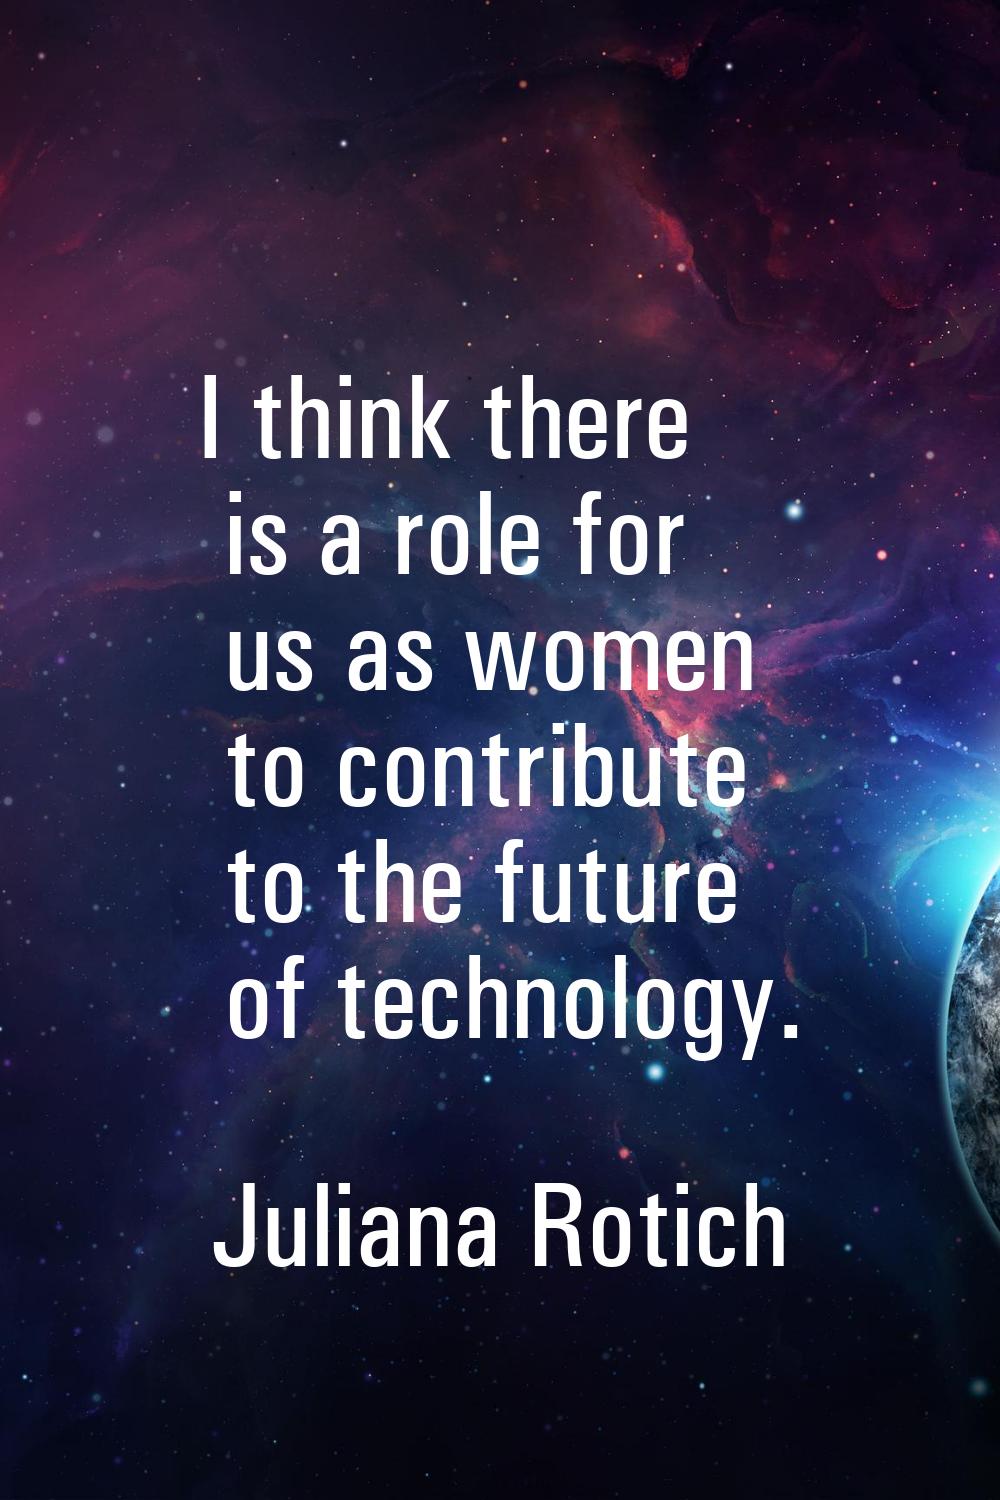 I think there is a role for us as women to contribute to the future of technology.